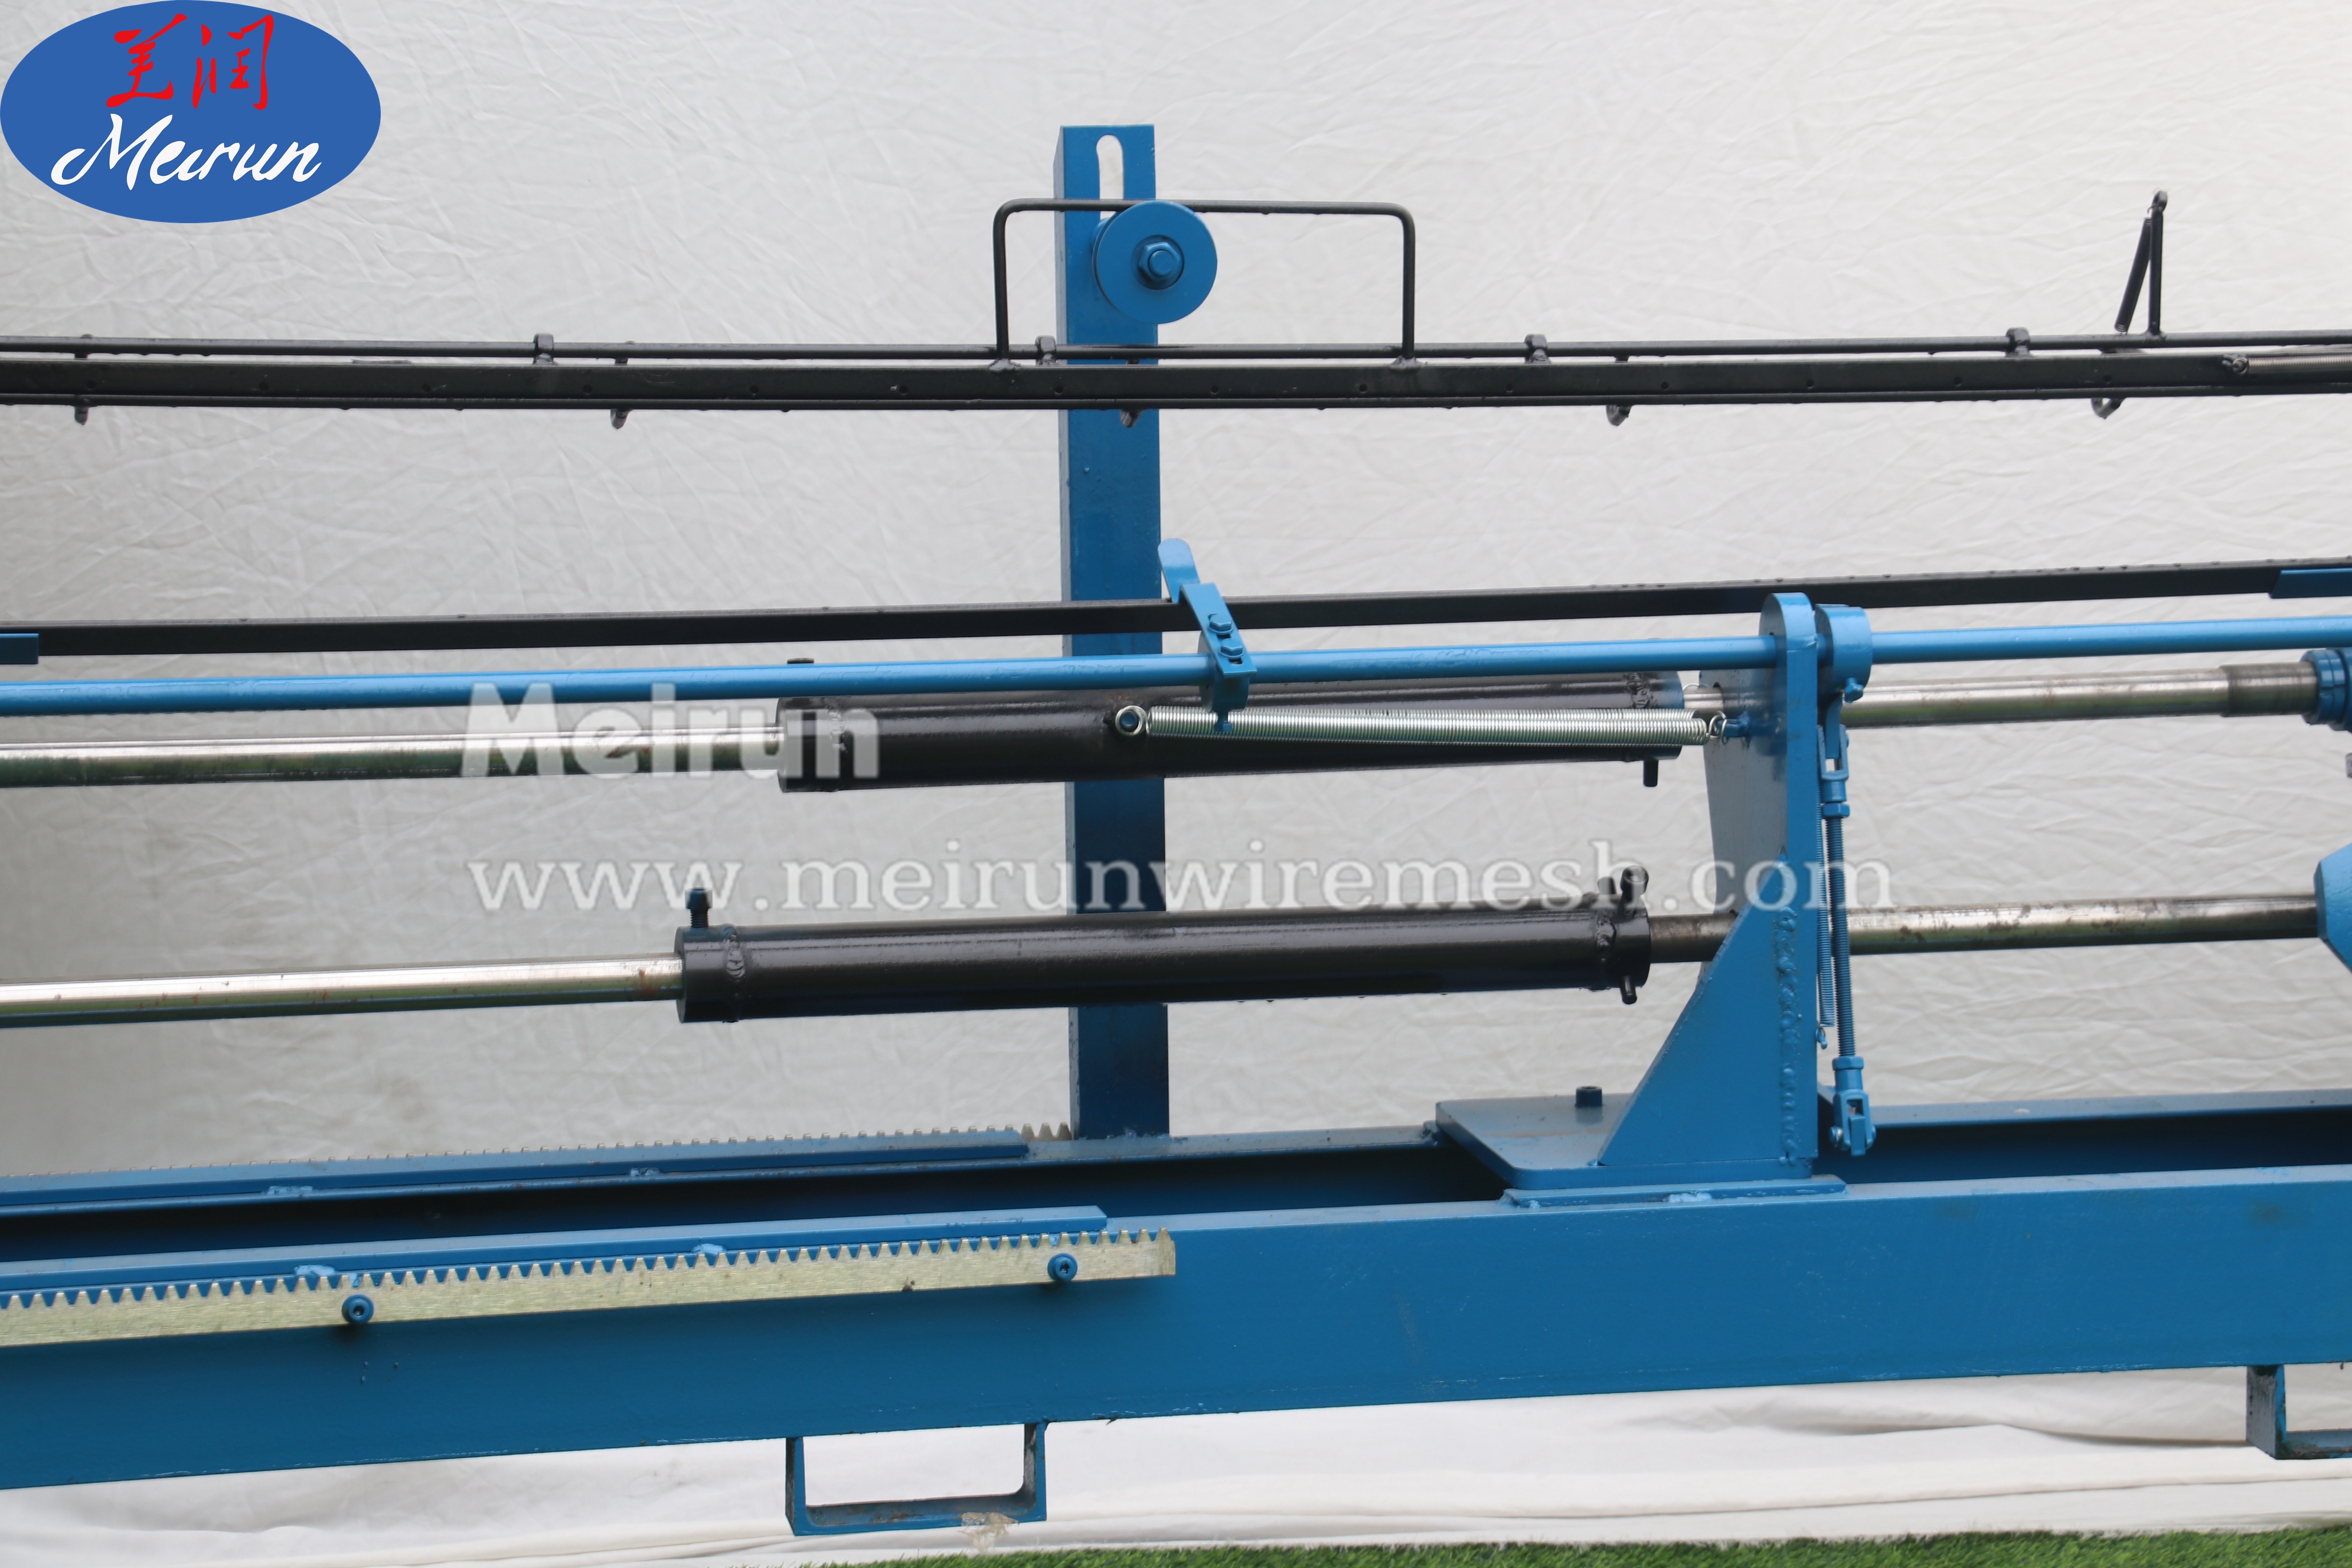 Annealed Tie Tensile Strength Baling Wire Machine